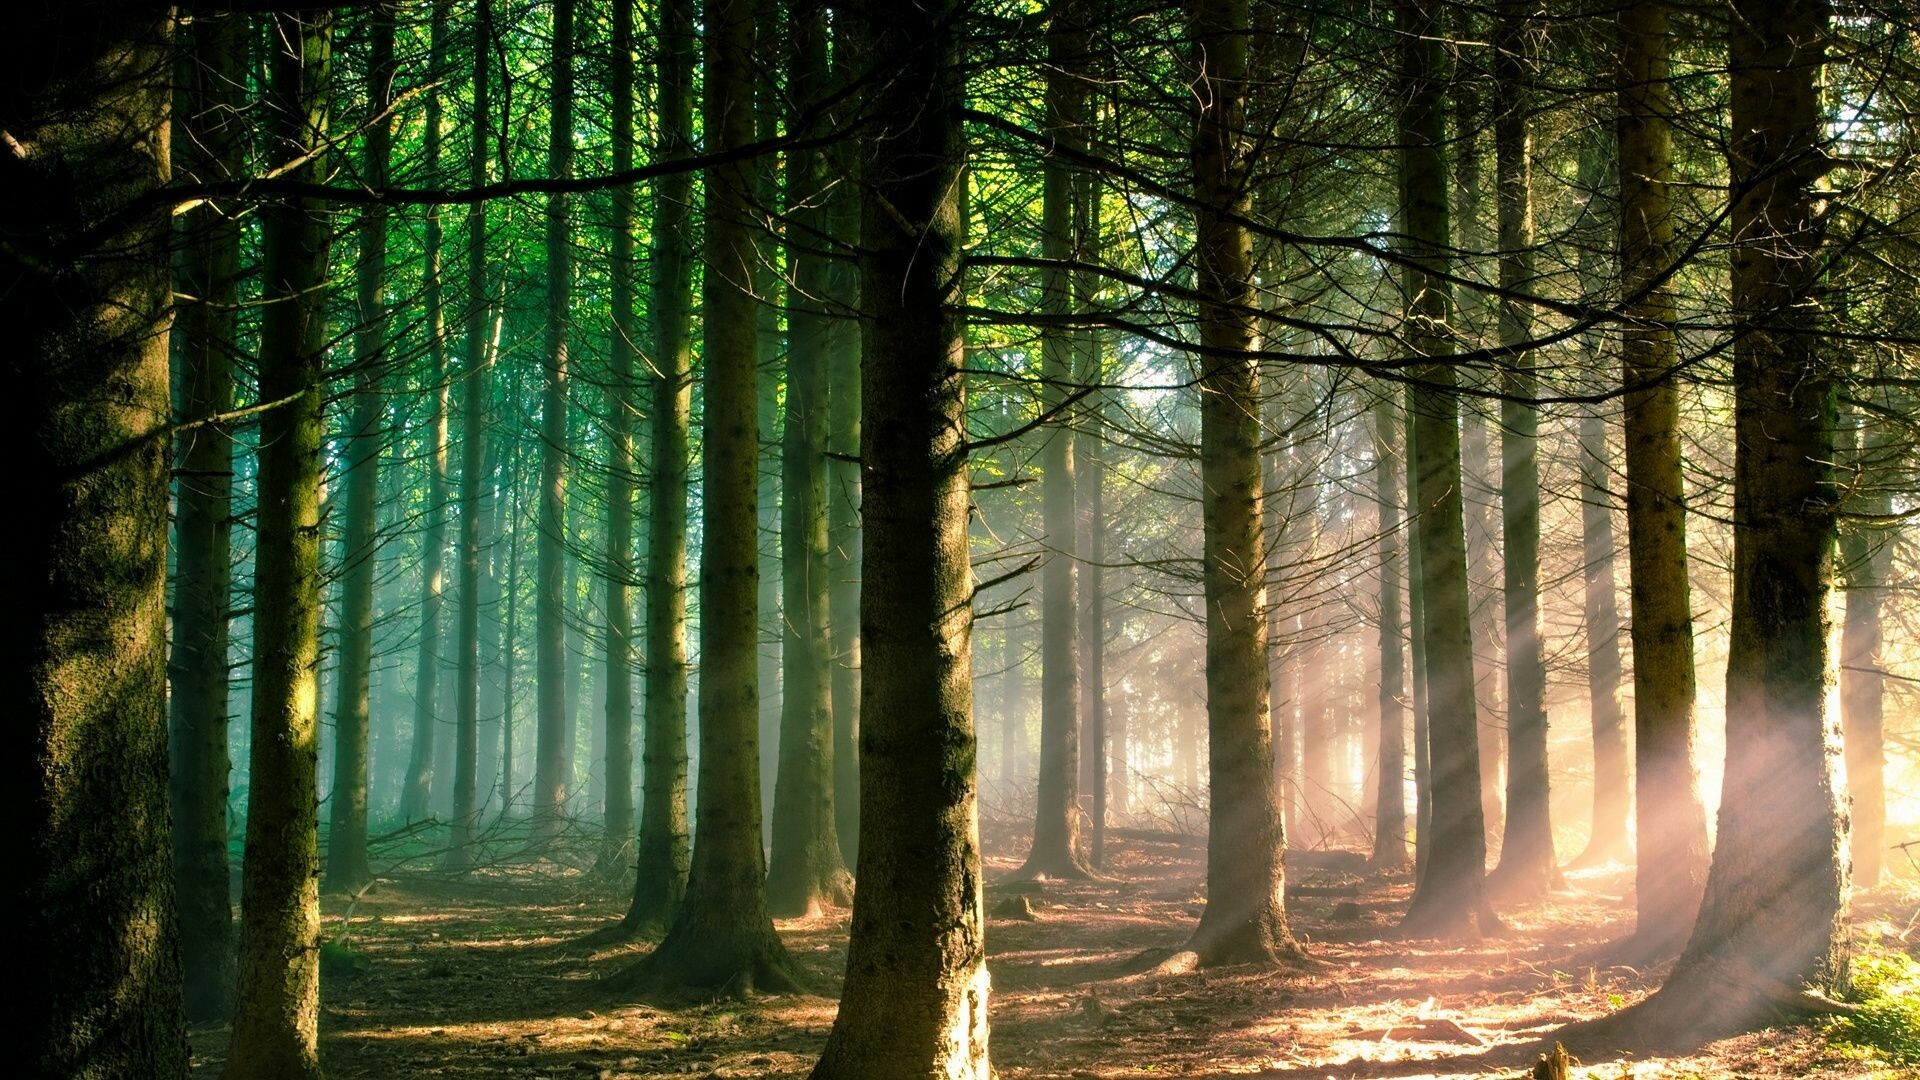 Majestic forest trees, Sunlight filters through, Tranquil woodland escape, Nature's embrace, 1920x1080 Full HD Desktop